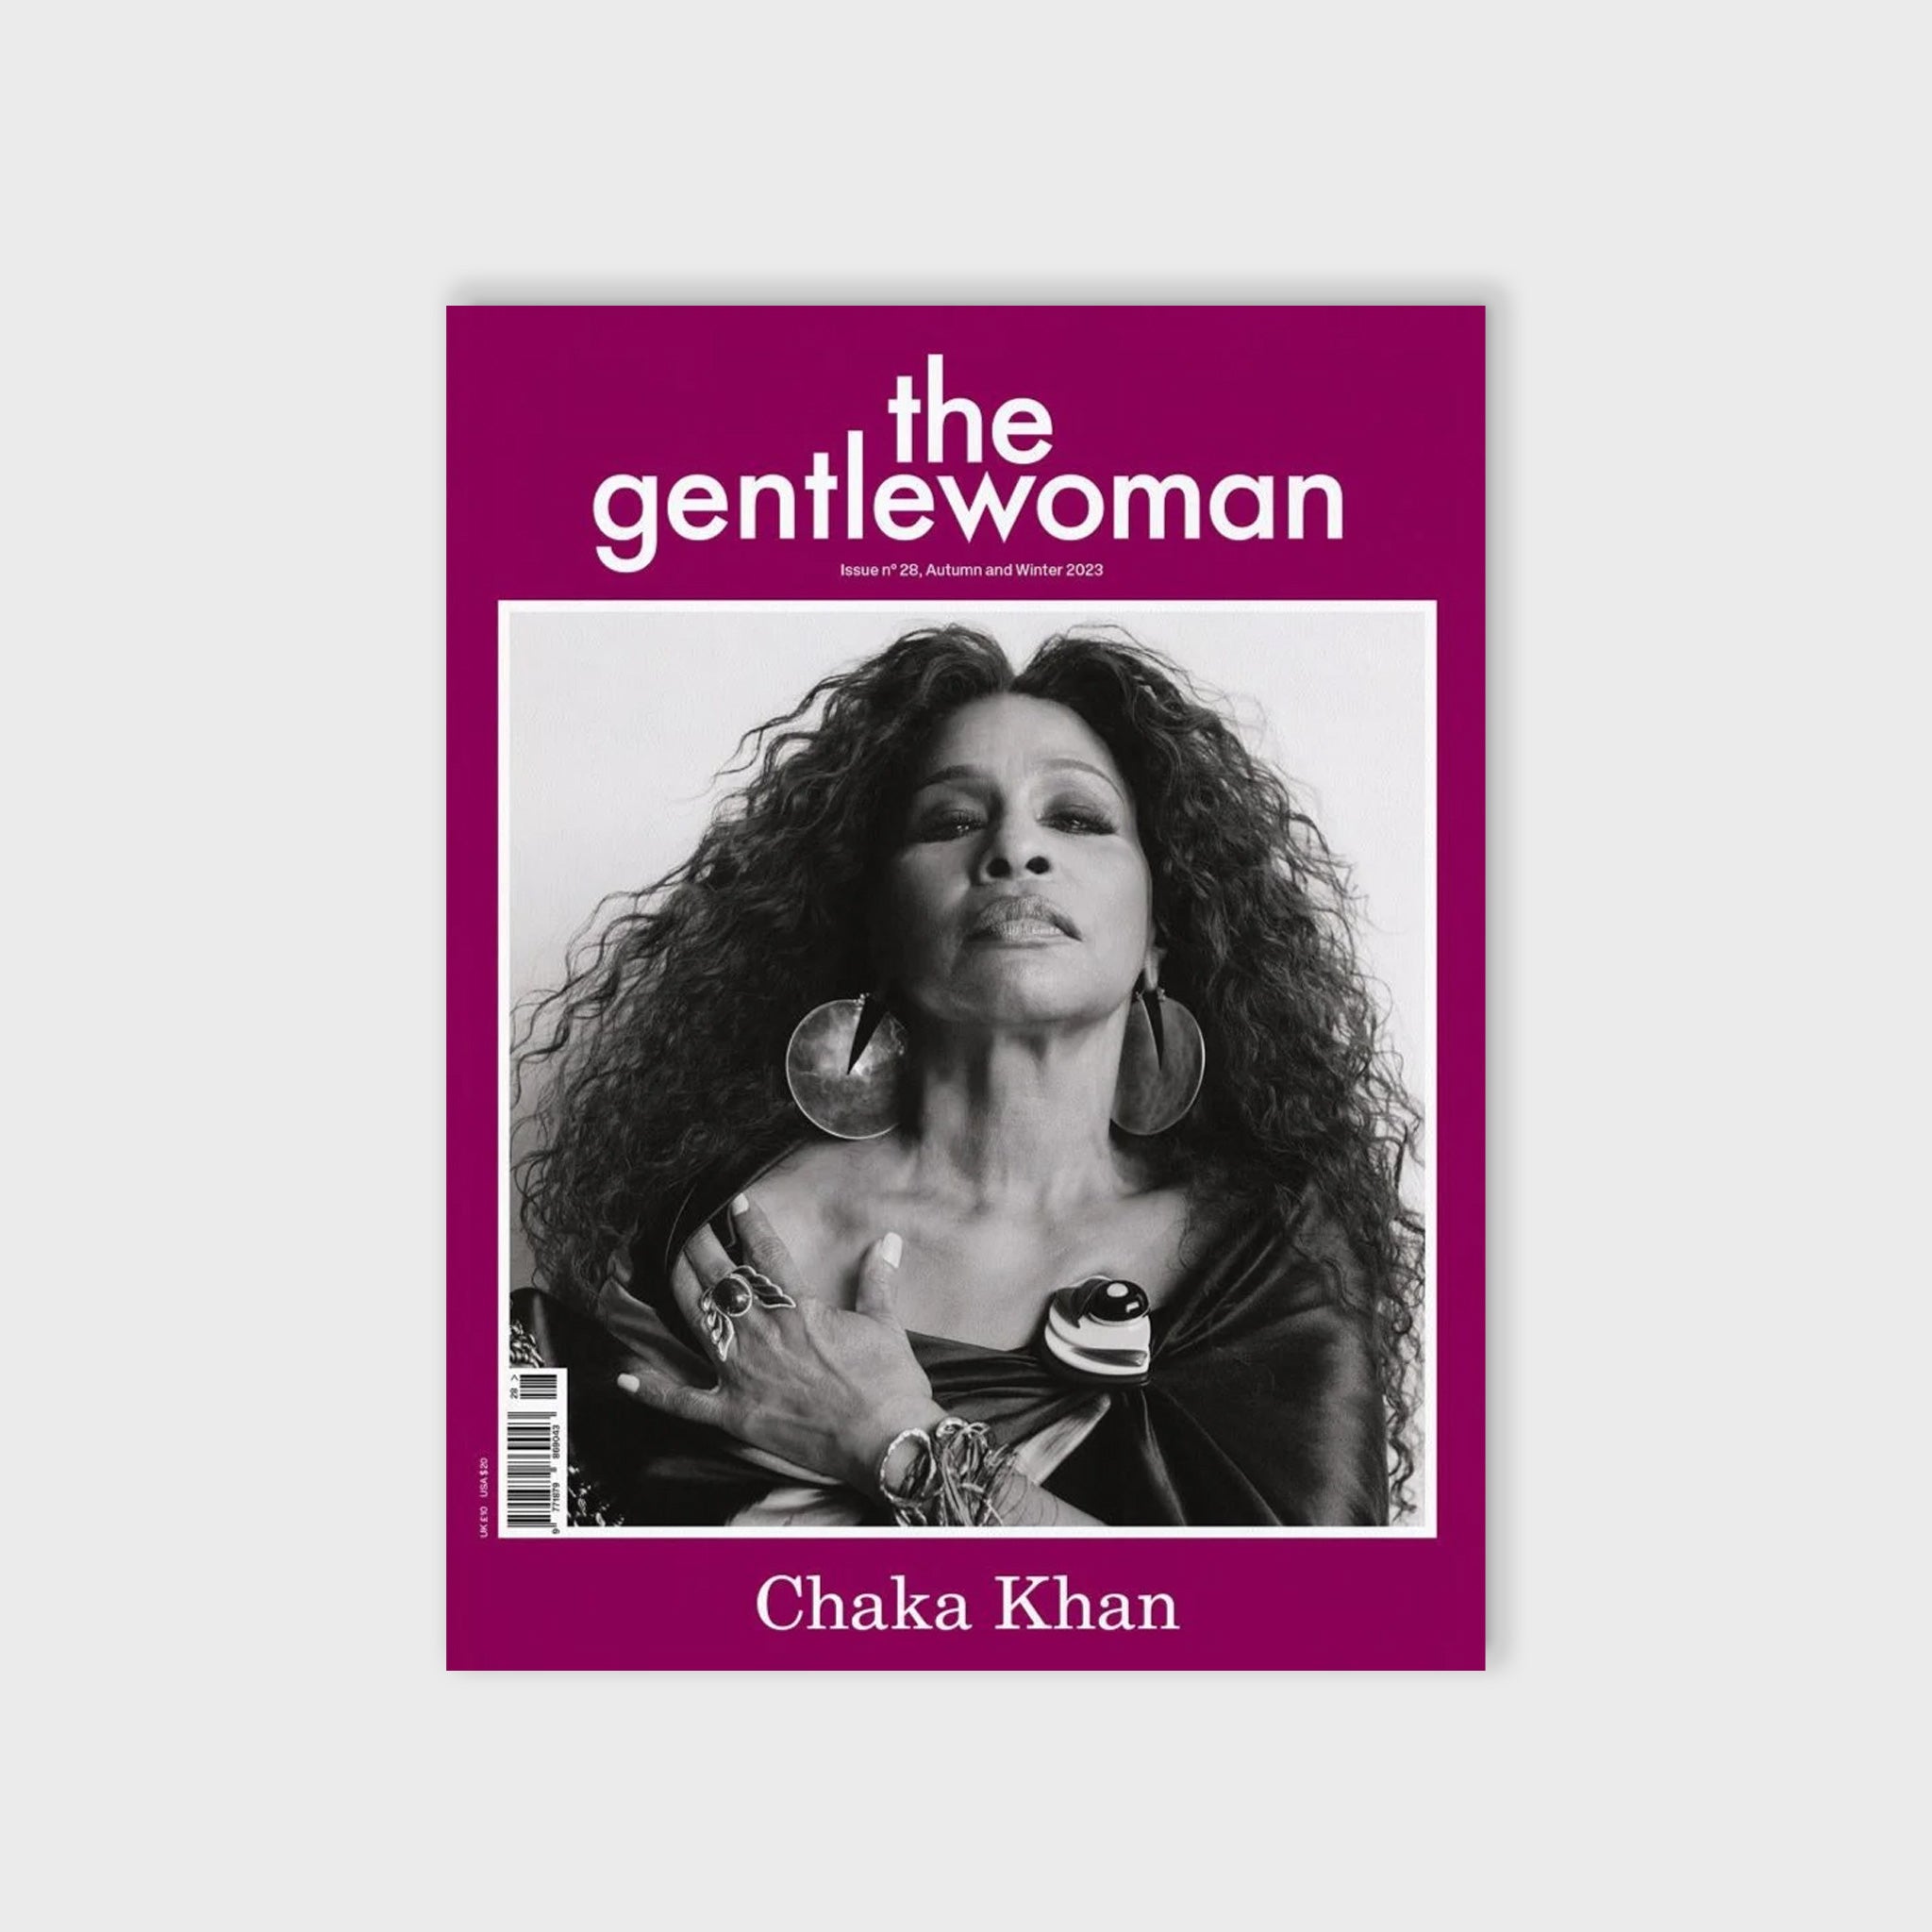 The Gentlewoman Magazine featuring a black and white photograph of Chaka Khan.